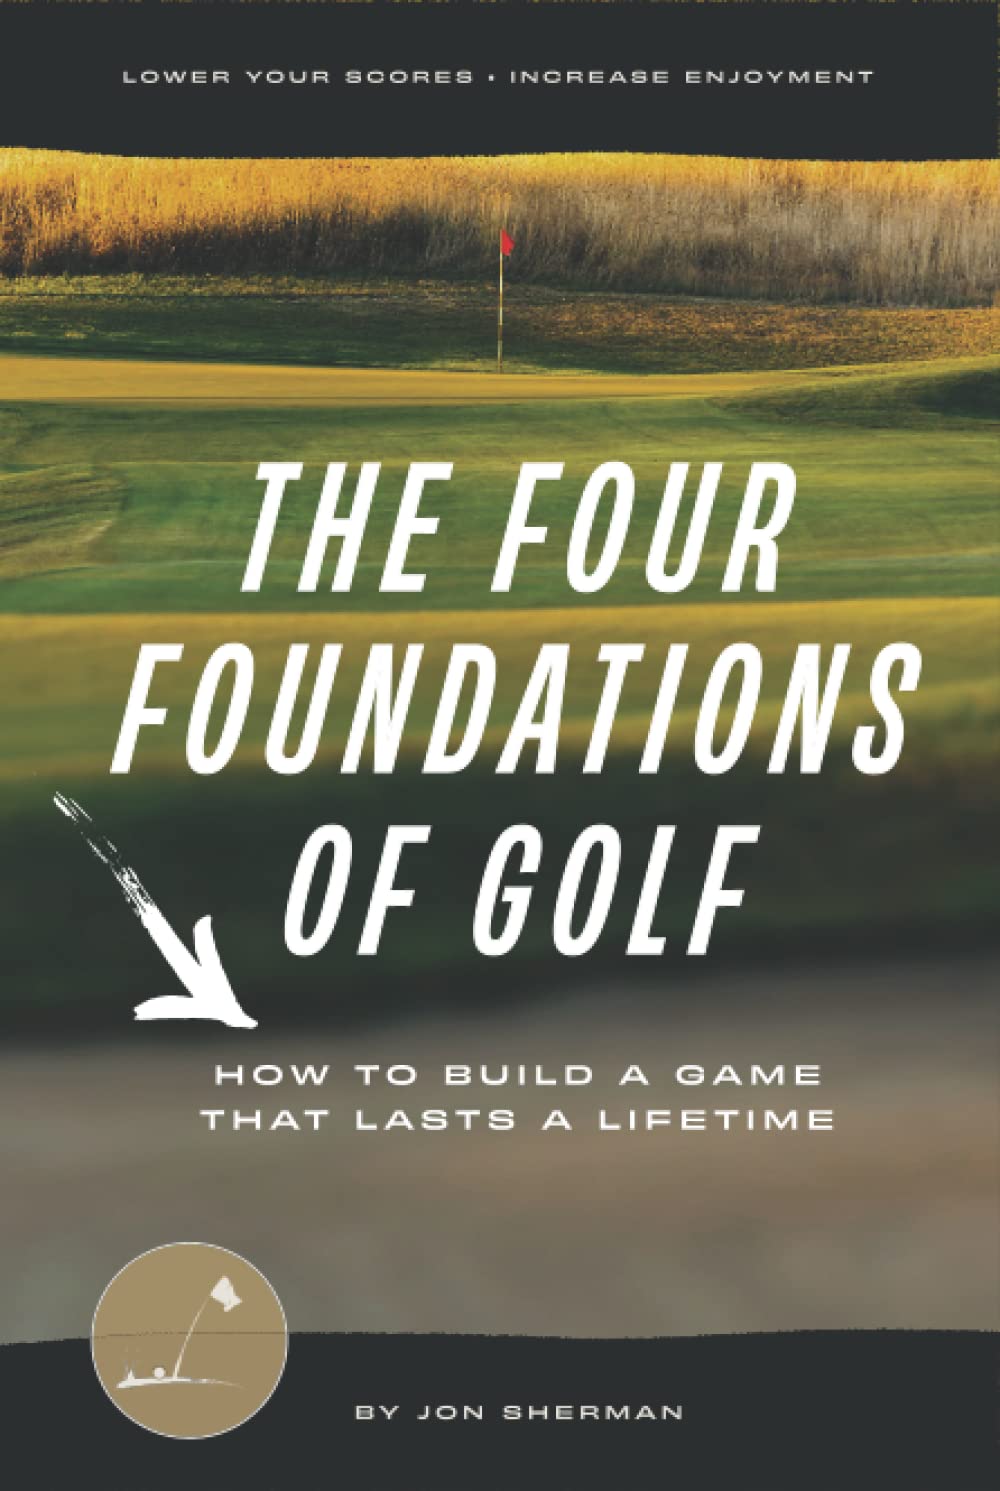 The Four Foundations of Golf: How to Build a Game That Lasts a Lifetime